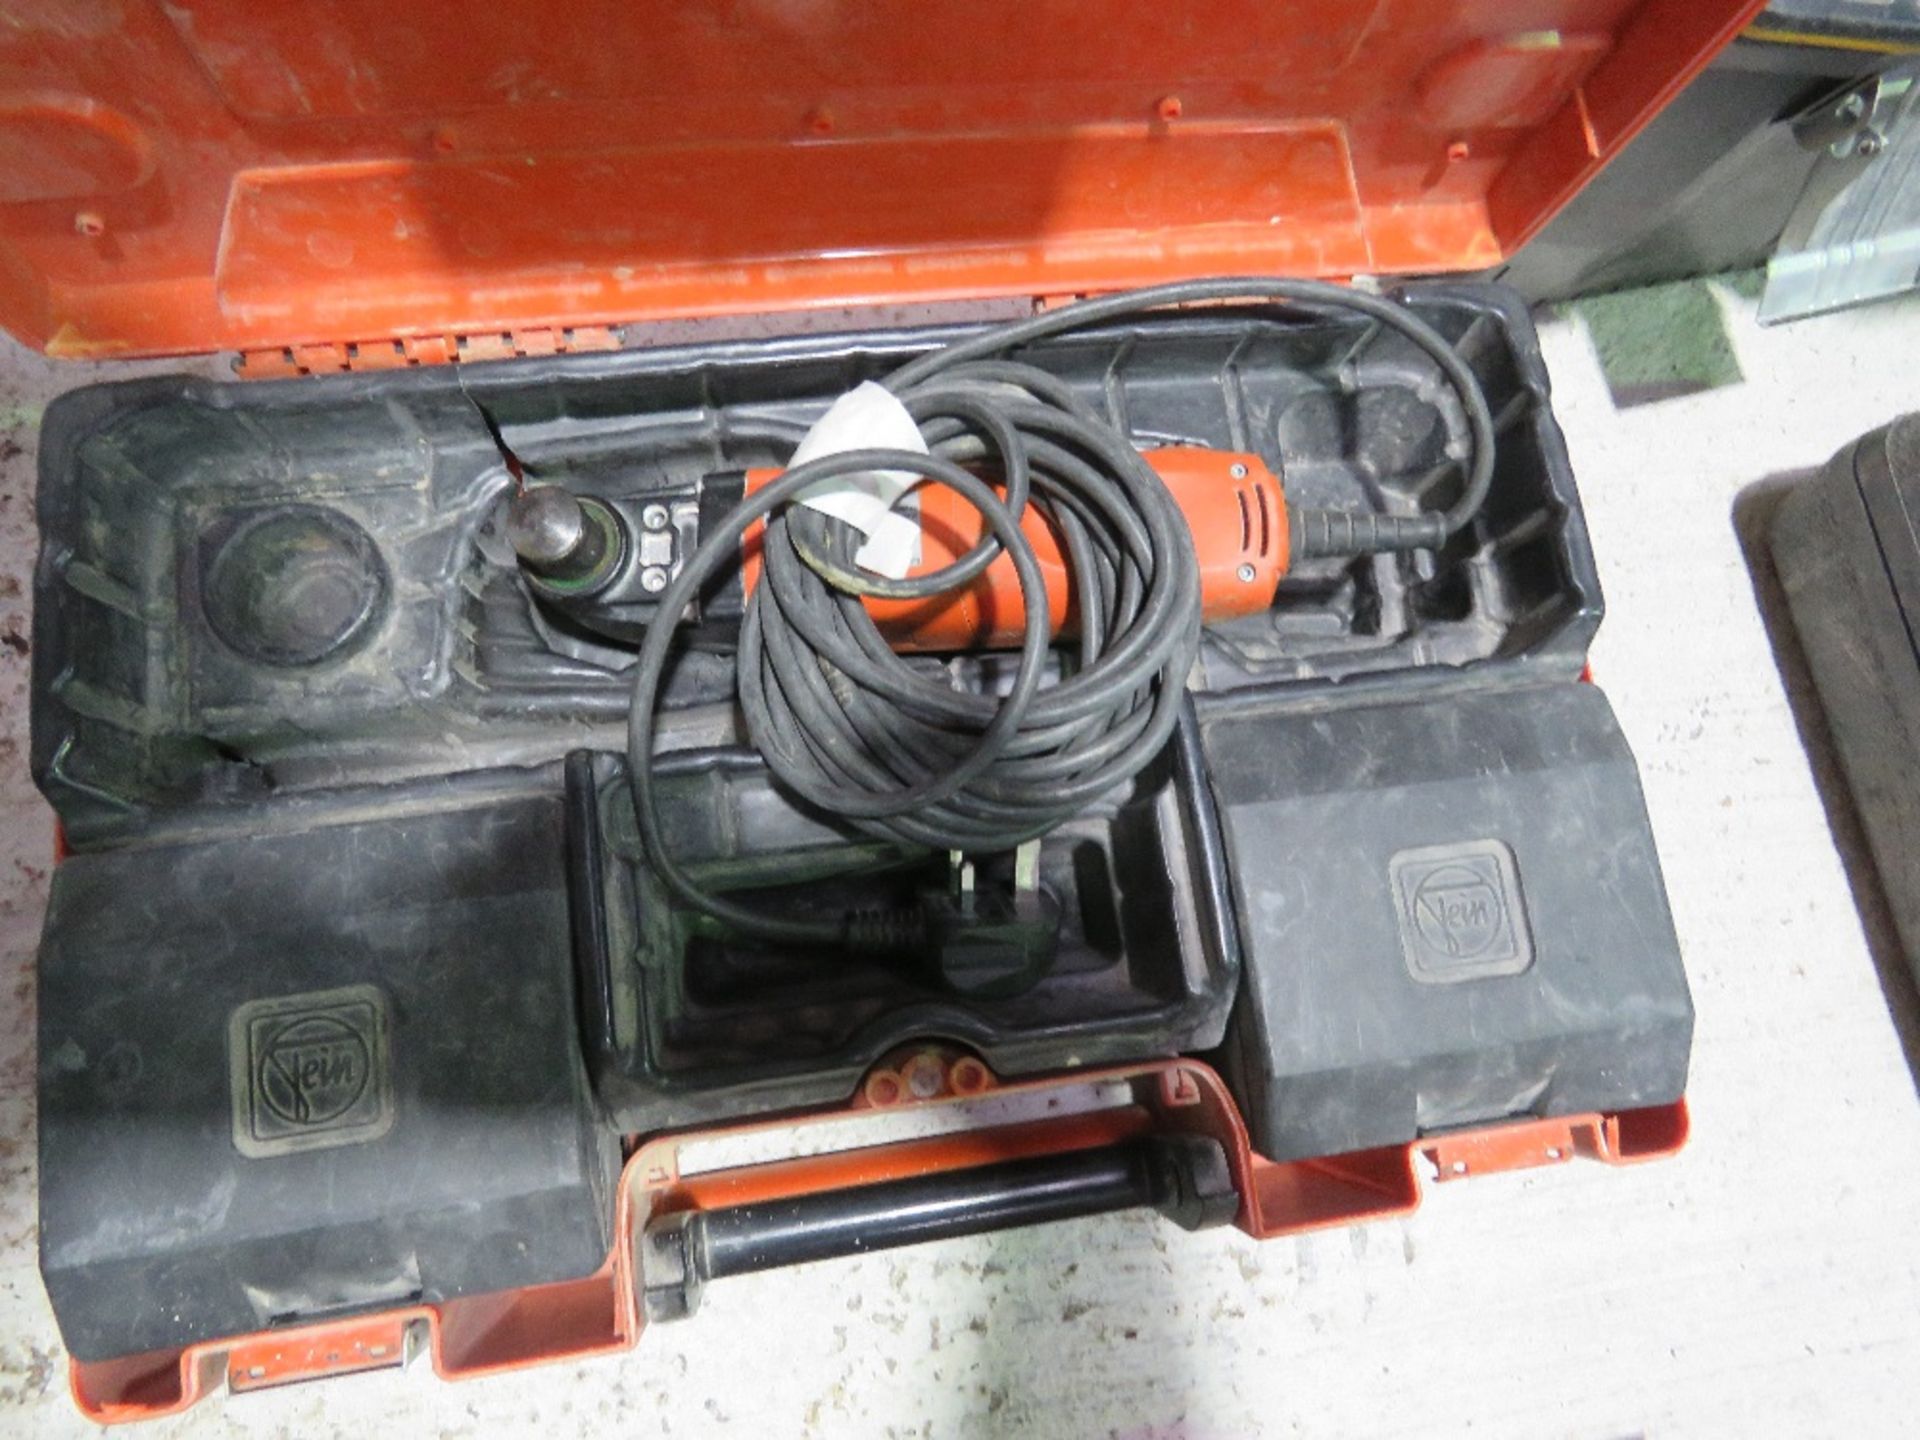 FEIN 240VOLT MULTI TOOL IN A CASE.....THIS LOT IS SOLD UNDER THE AUCTIONEERS MARGIN SCHEME, THEREFOR